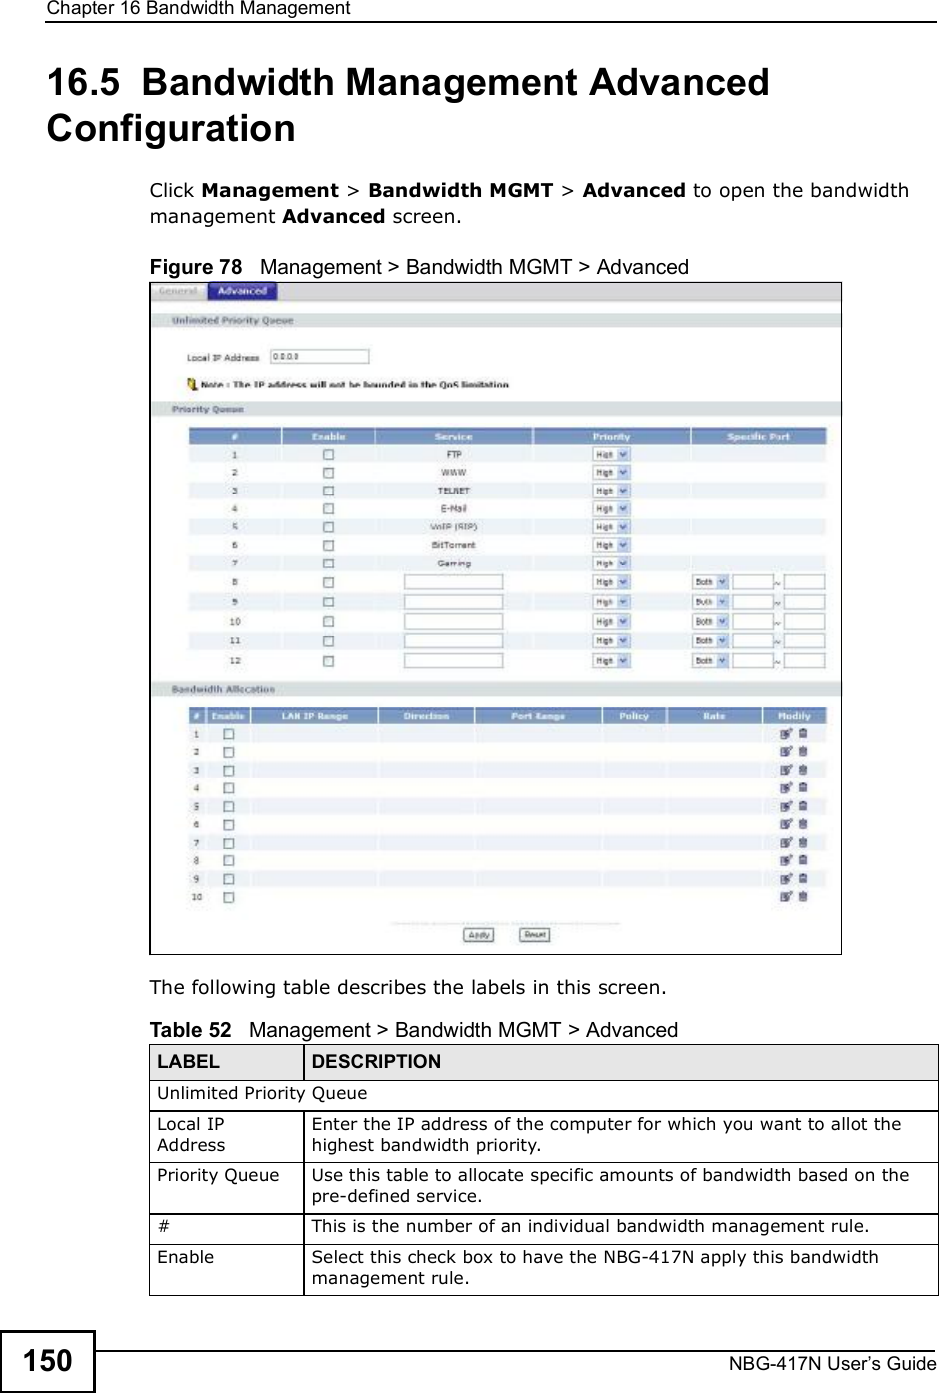 Chapter 16Bandwidth ManagementNBG-417N User s Guide15016.5  Bandwidth Management Advanced Configuration Click Management &gt; Bandwidth MGMT &gt; Advanced to open the bandwidth management Advanced screen.Figure 78   Management &gt; Bandwidth MGMT &gt; Advanced The following table describes the labels in this screen.Table 52   Management &gt; Bandwidth MGMT &gt; Advanced LABEL DESCRIPTIONUnlimited Priority QueueLocal IP AddressEnter the IP address of the computer for which you want to allot the highest bandwidth priority. Priority Queue Use this table to allocate specific amounts of bandwidth based on the pre-defined service.#This is the number of an individual bandwidth management rule.Enable Select this check box to have the NBG-417N apply this bandwidth management rule.